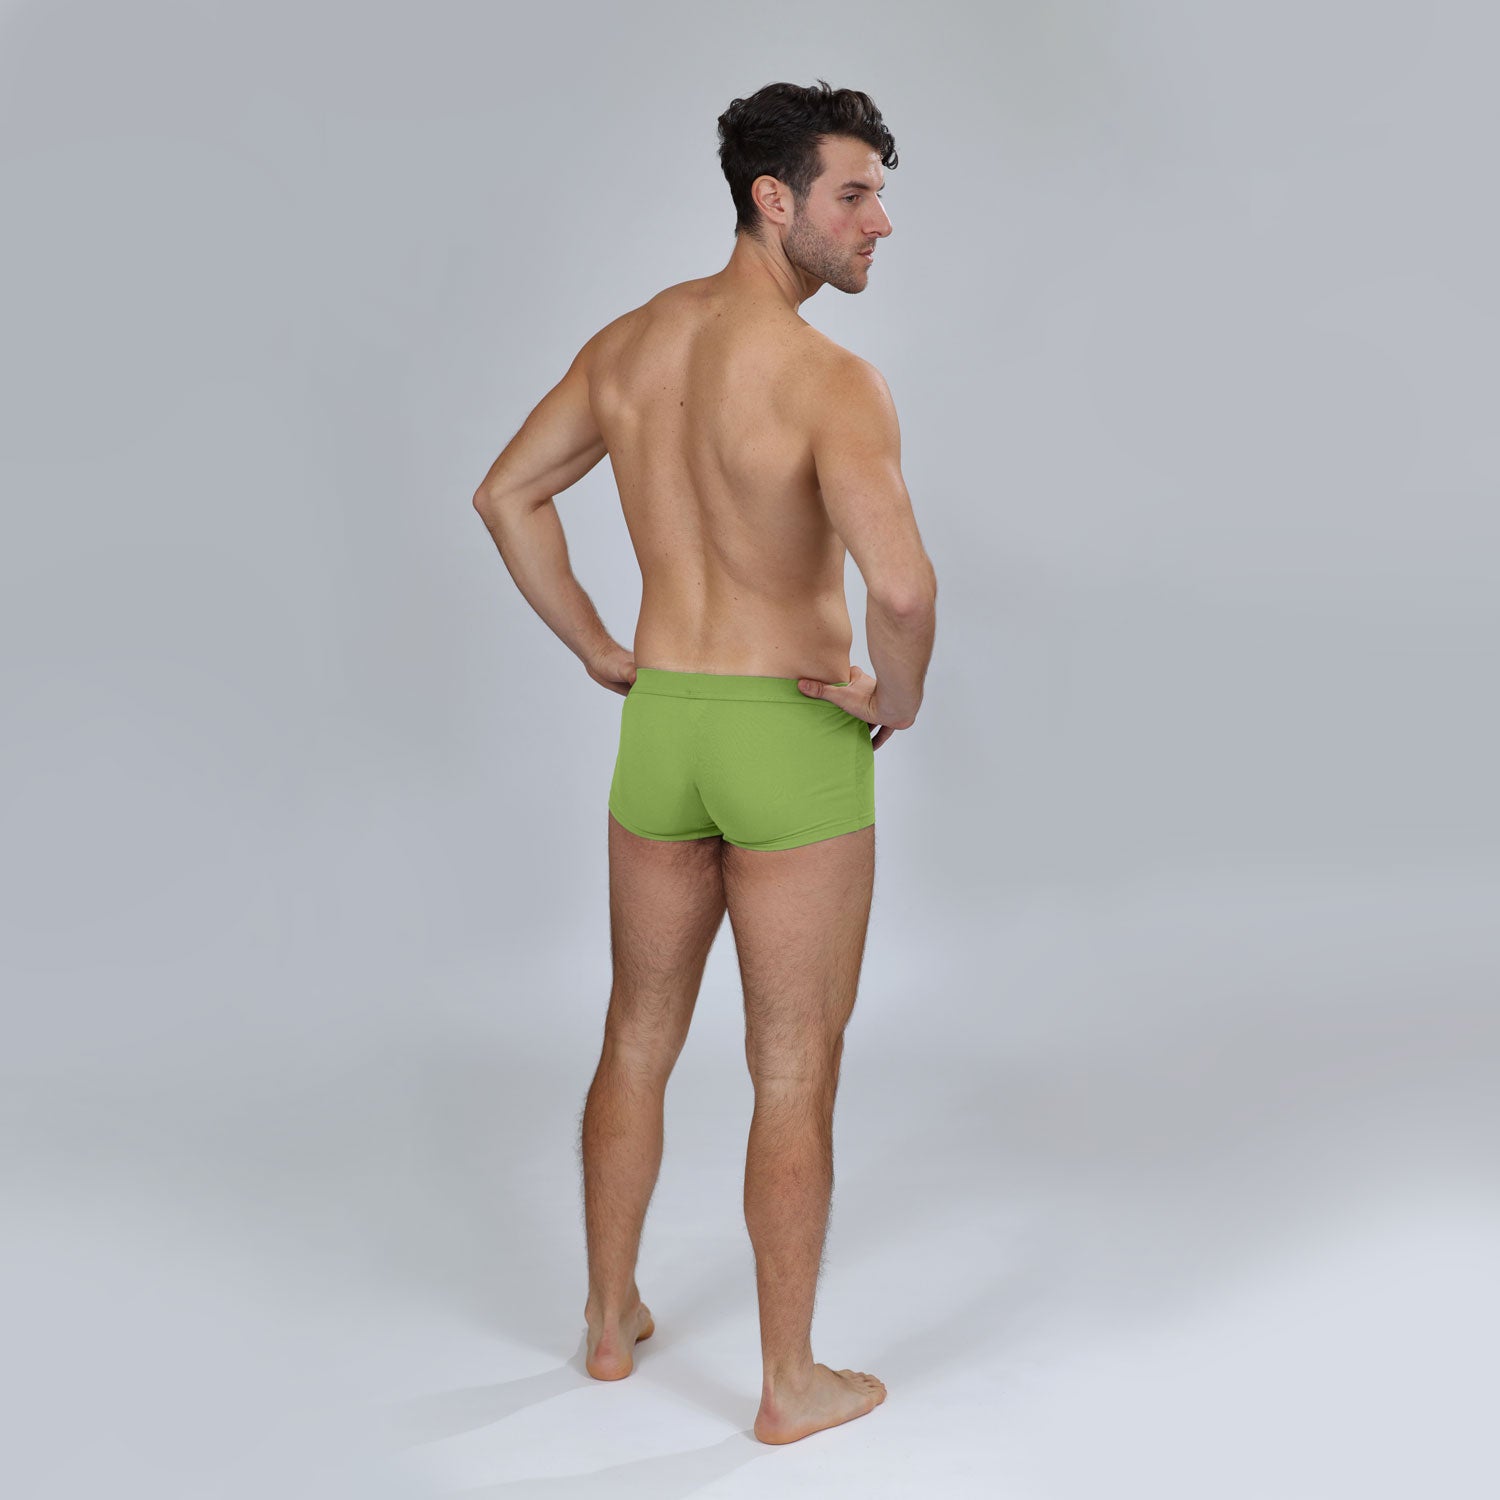 The Limited Edition Greenery Trunks for men in the USA and Canada